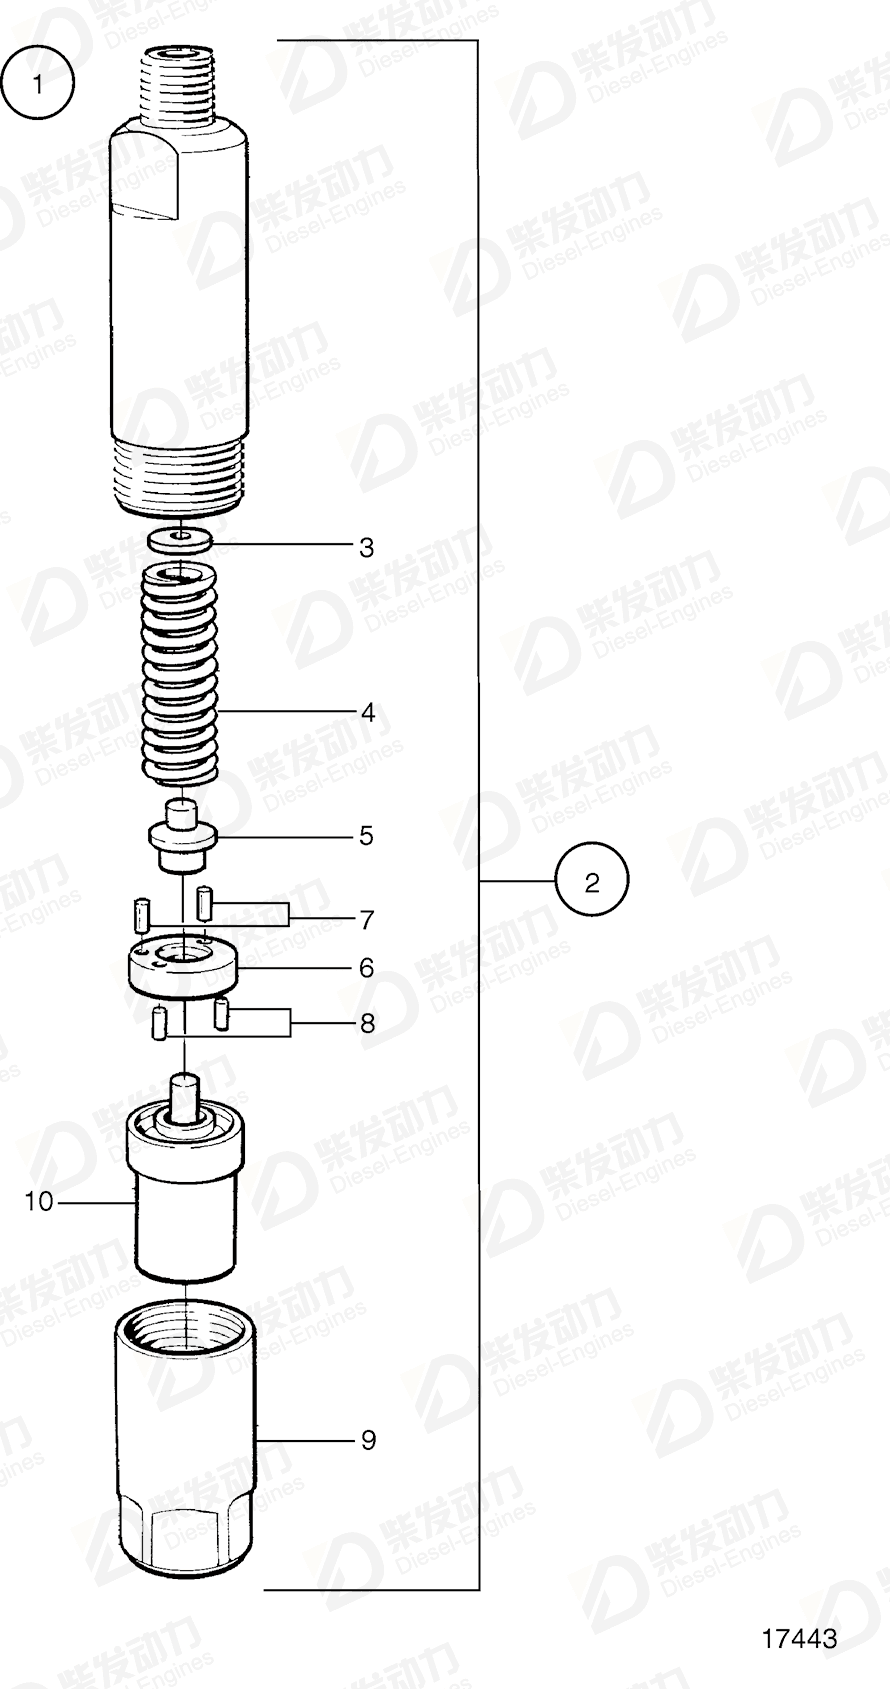 VOLVO Injector 3825001 Drawing